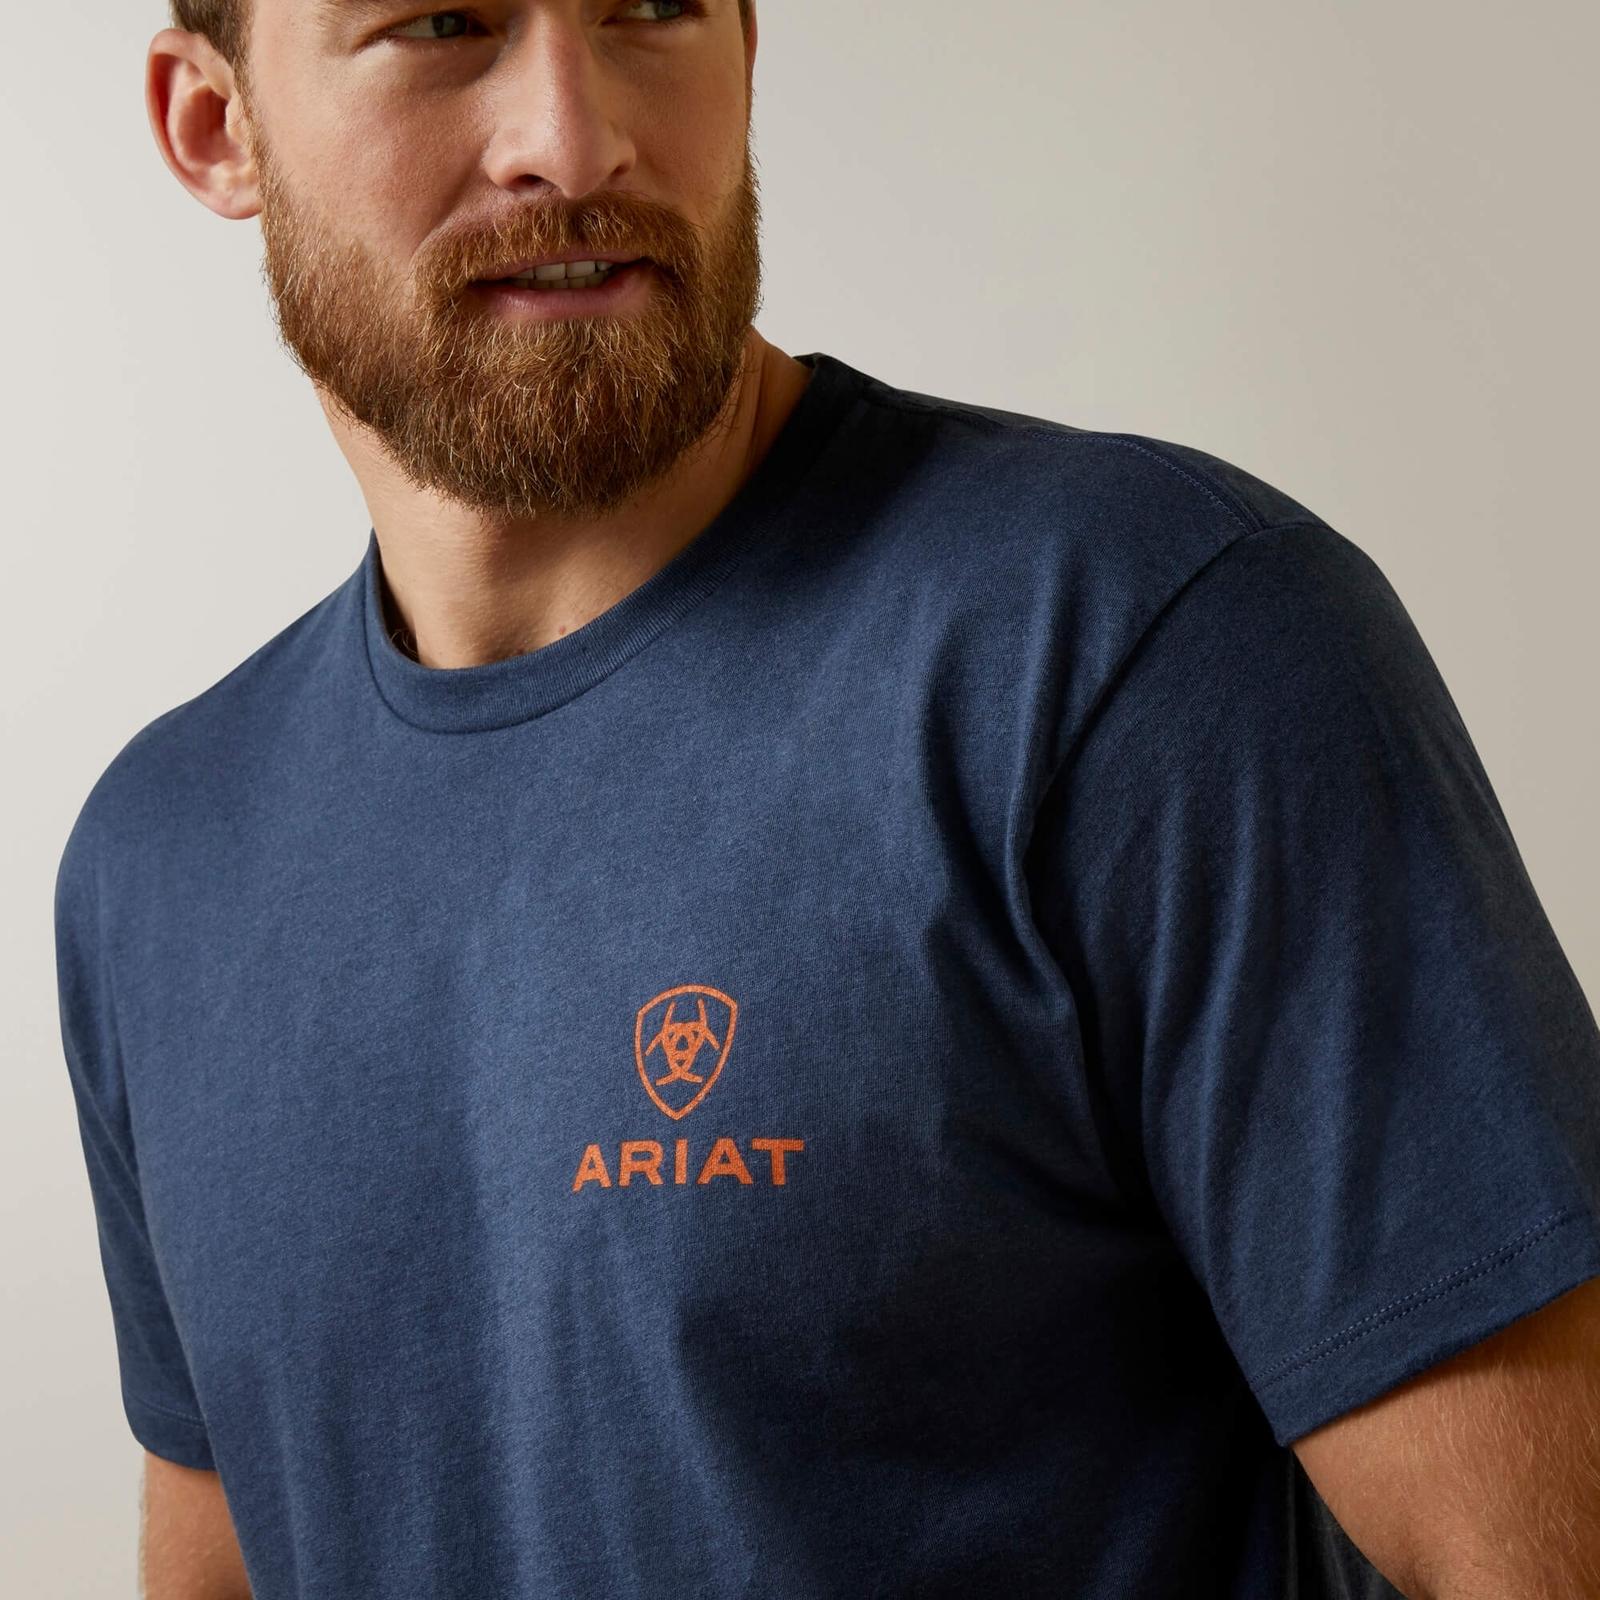 Ariat Mustang Fever T-Shirt front close view